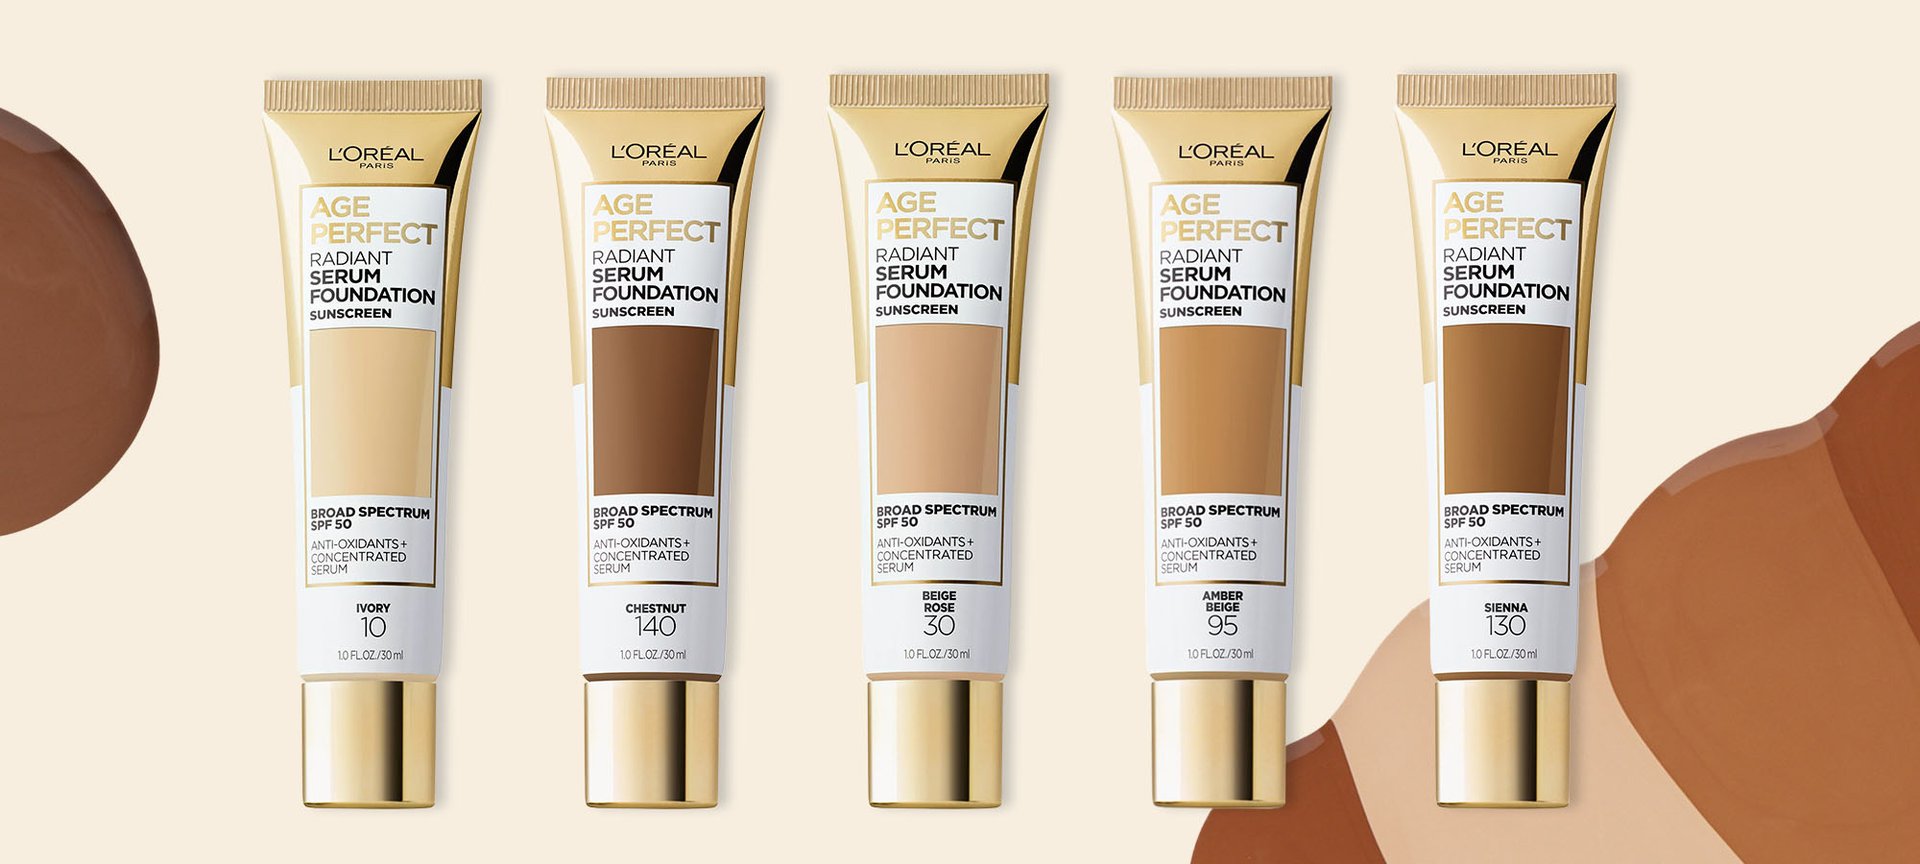 Caramel Sand 4 - Warm Neutral - Find products in this colour